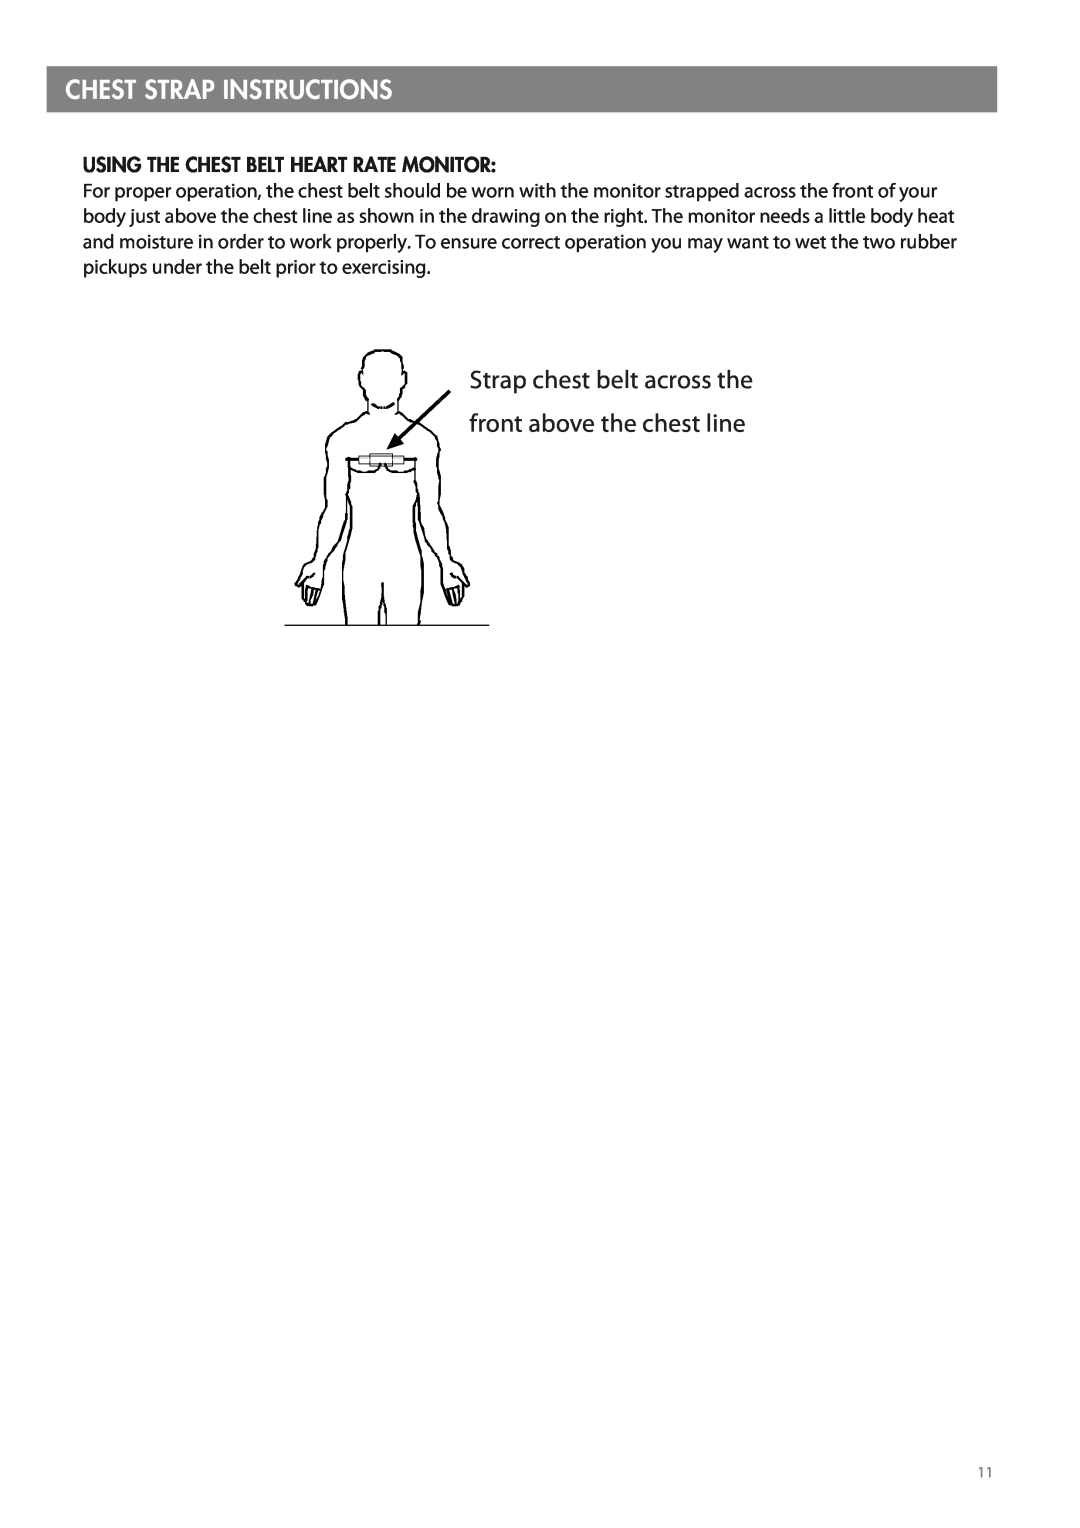 Smooth Fitness 07858-699 manual Chest Strap Instructions, Strap chest belt across the front above the chest line 